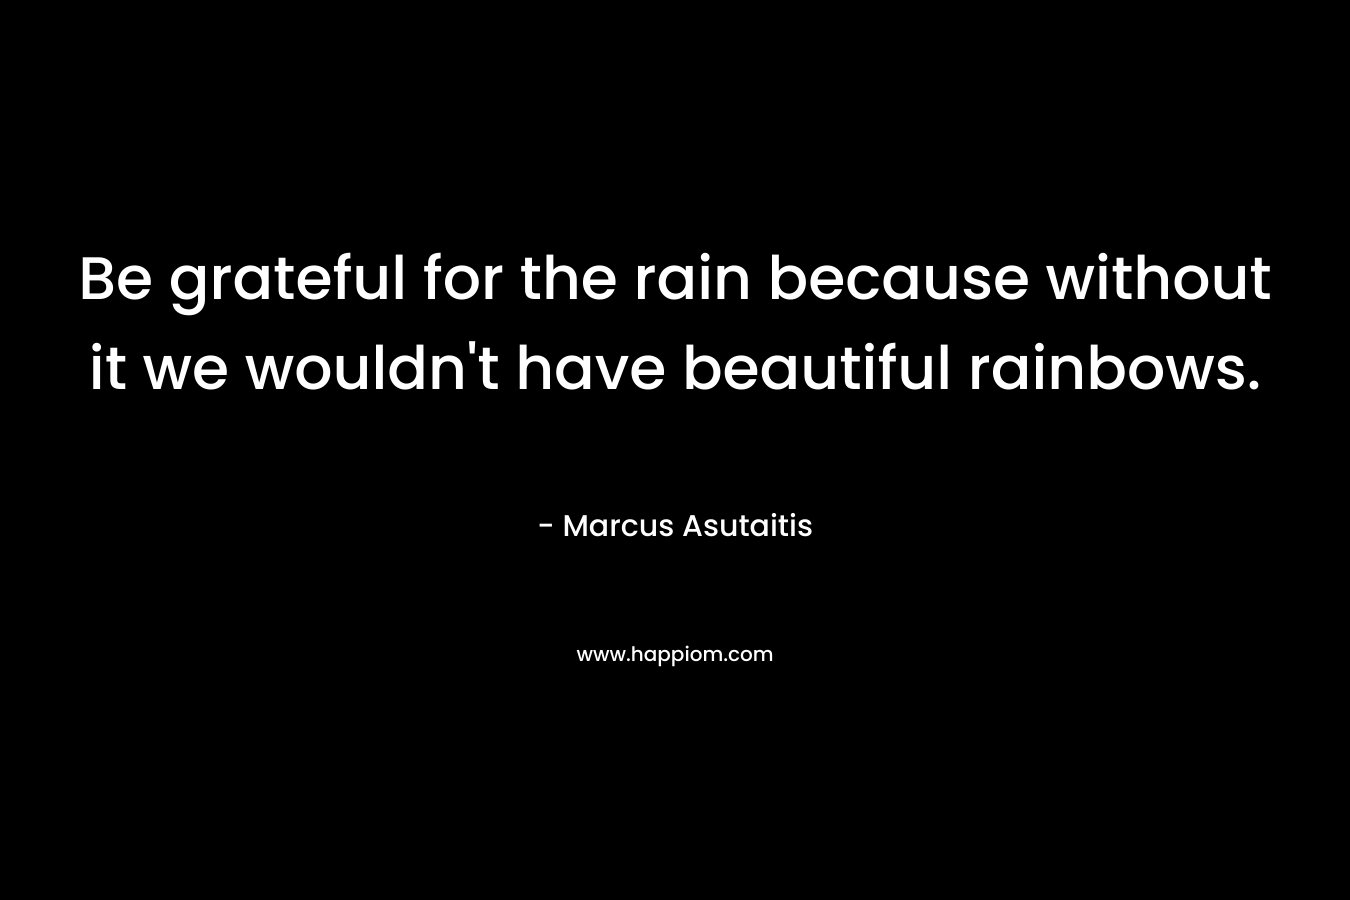 Be grateful for the rain because without it we wouldn’t have beautiful rainbows. – Marcus Asutaitis